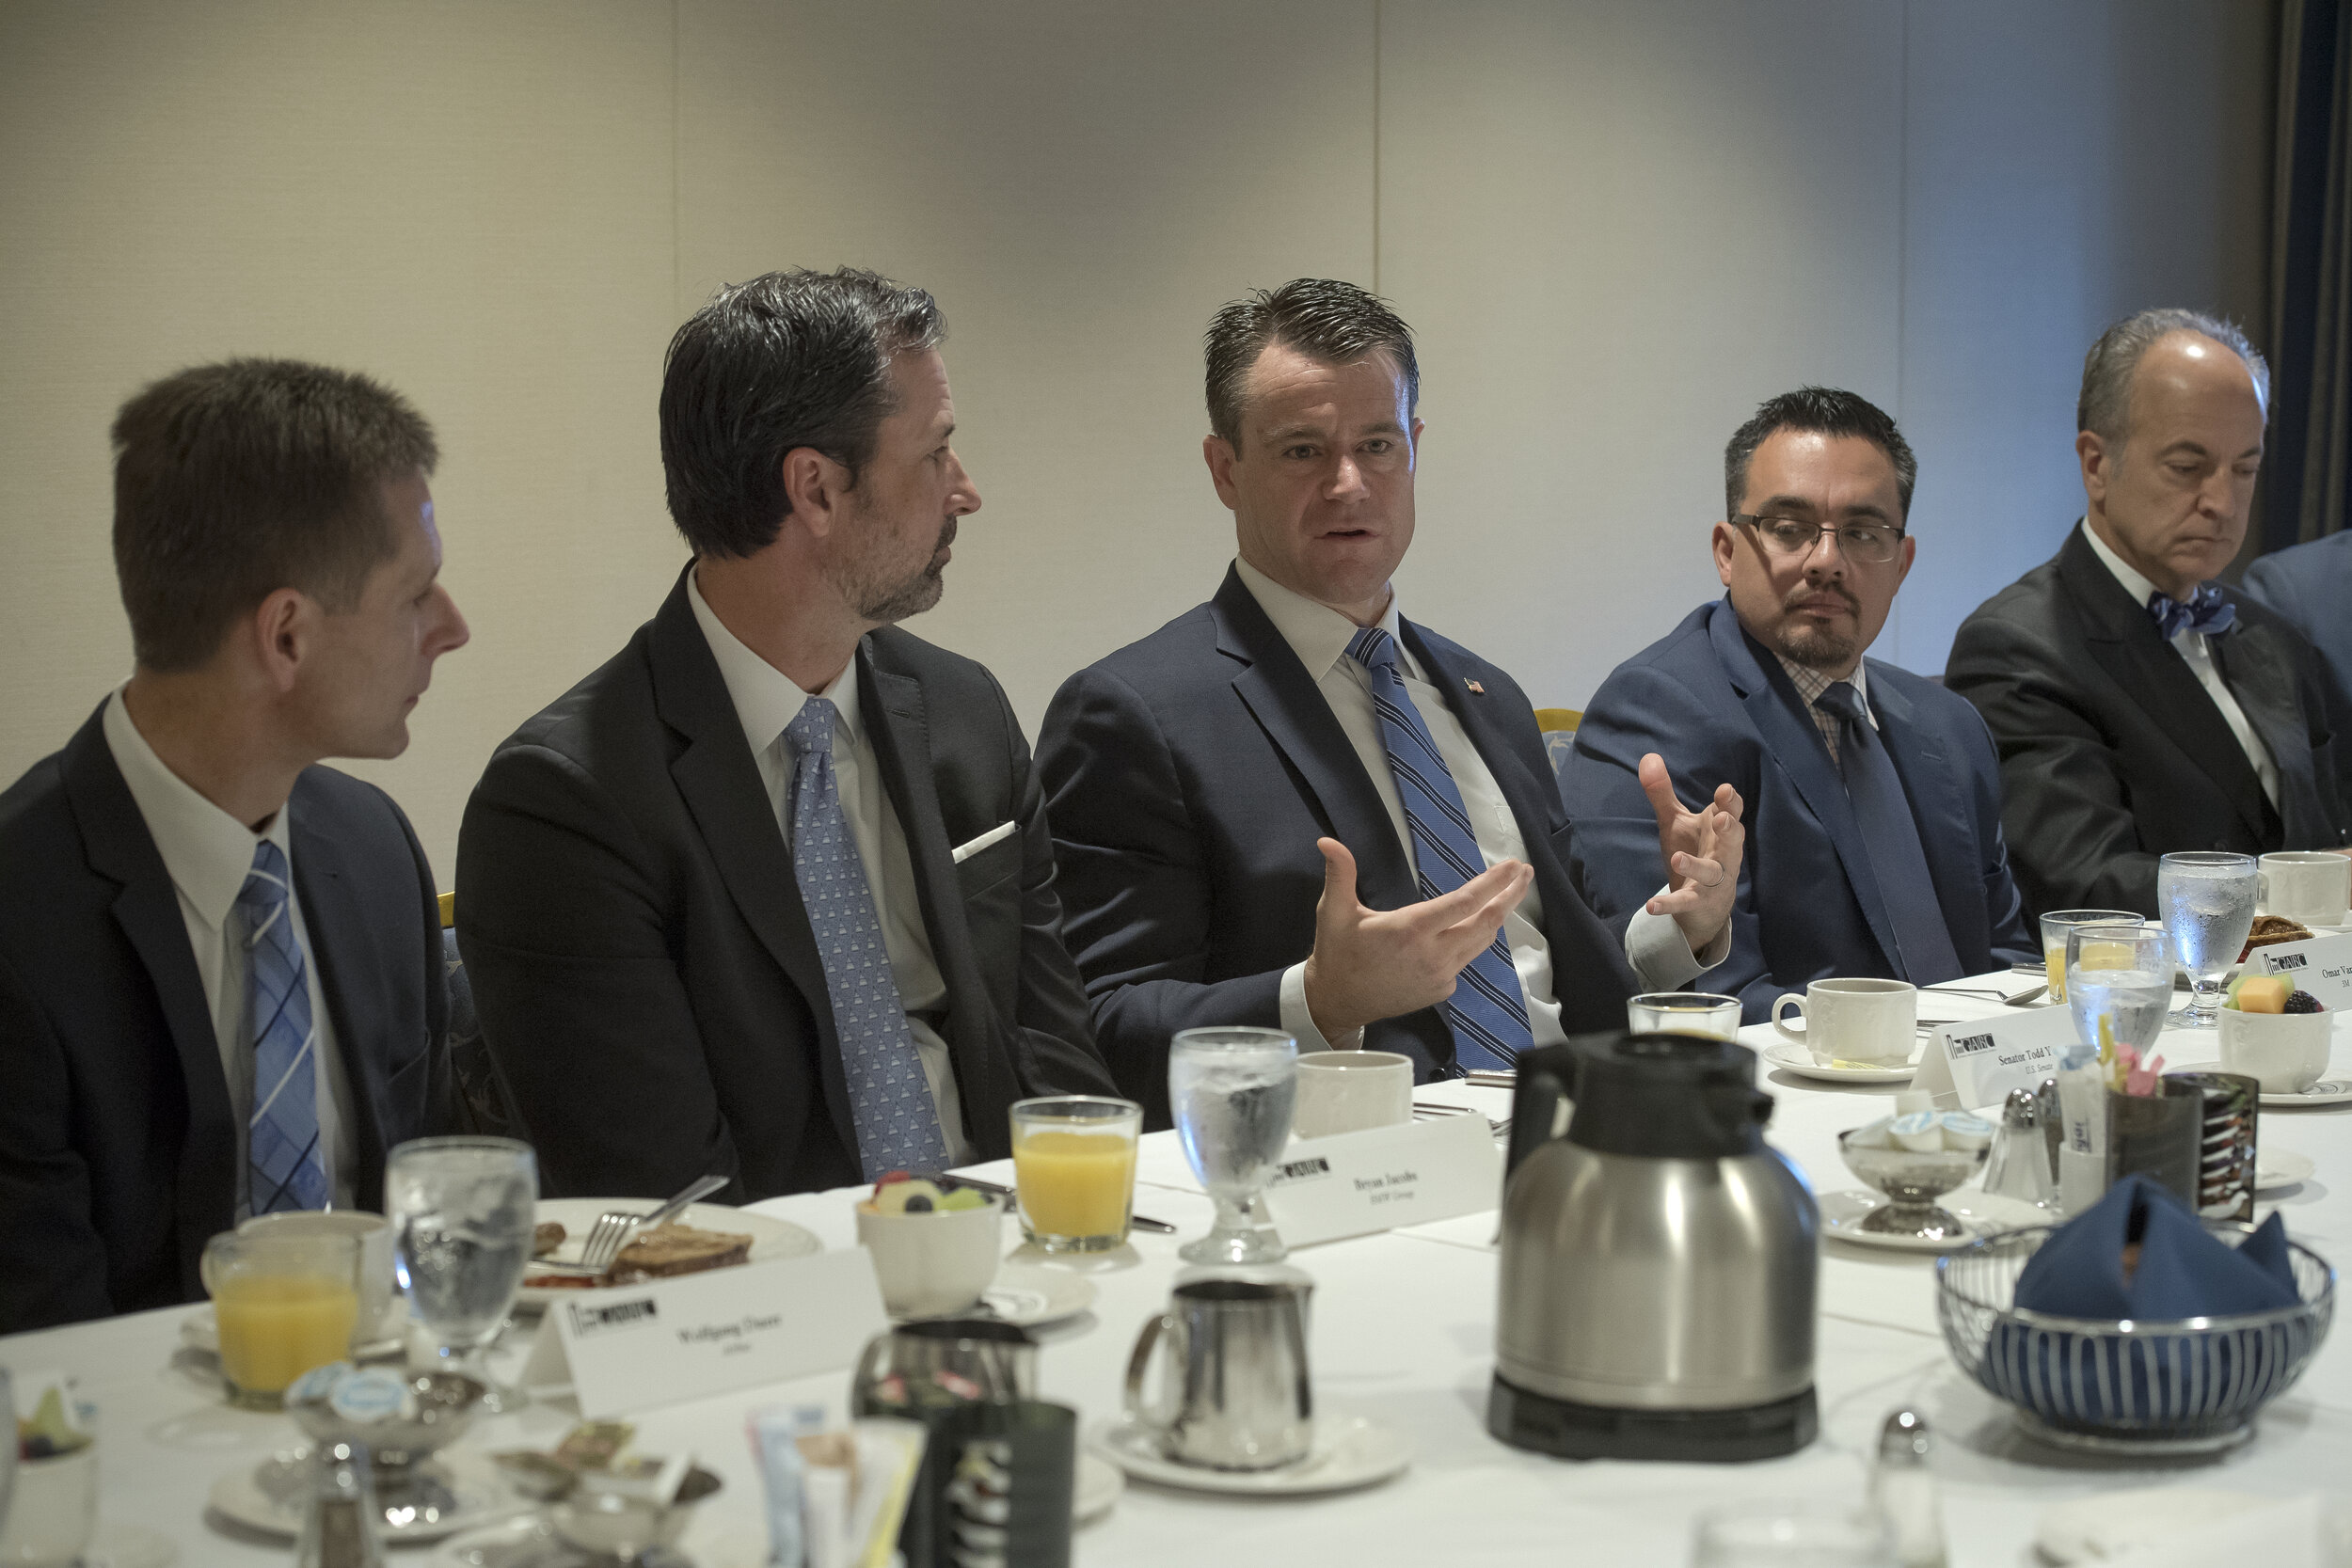  Wolfgang Duerr (Airbus), Bryan Jacobs (BMW), Senator Todd Young (IN), Omar Vargas (3M), and David Geanacopoulos (Volkswagen) 